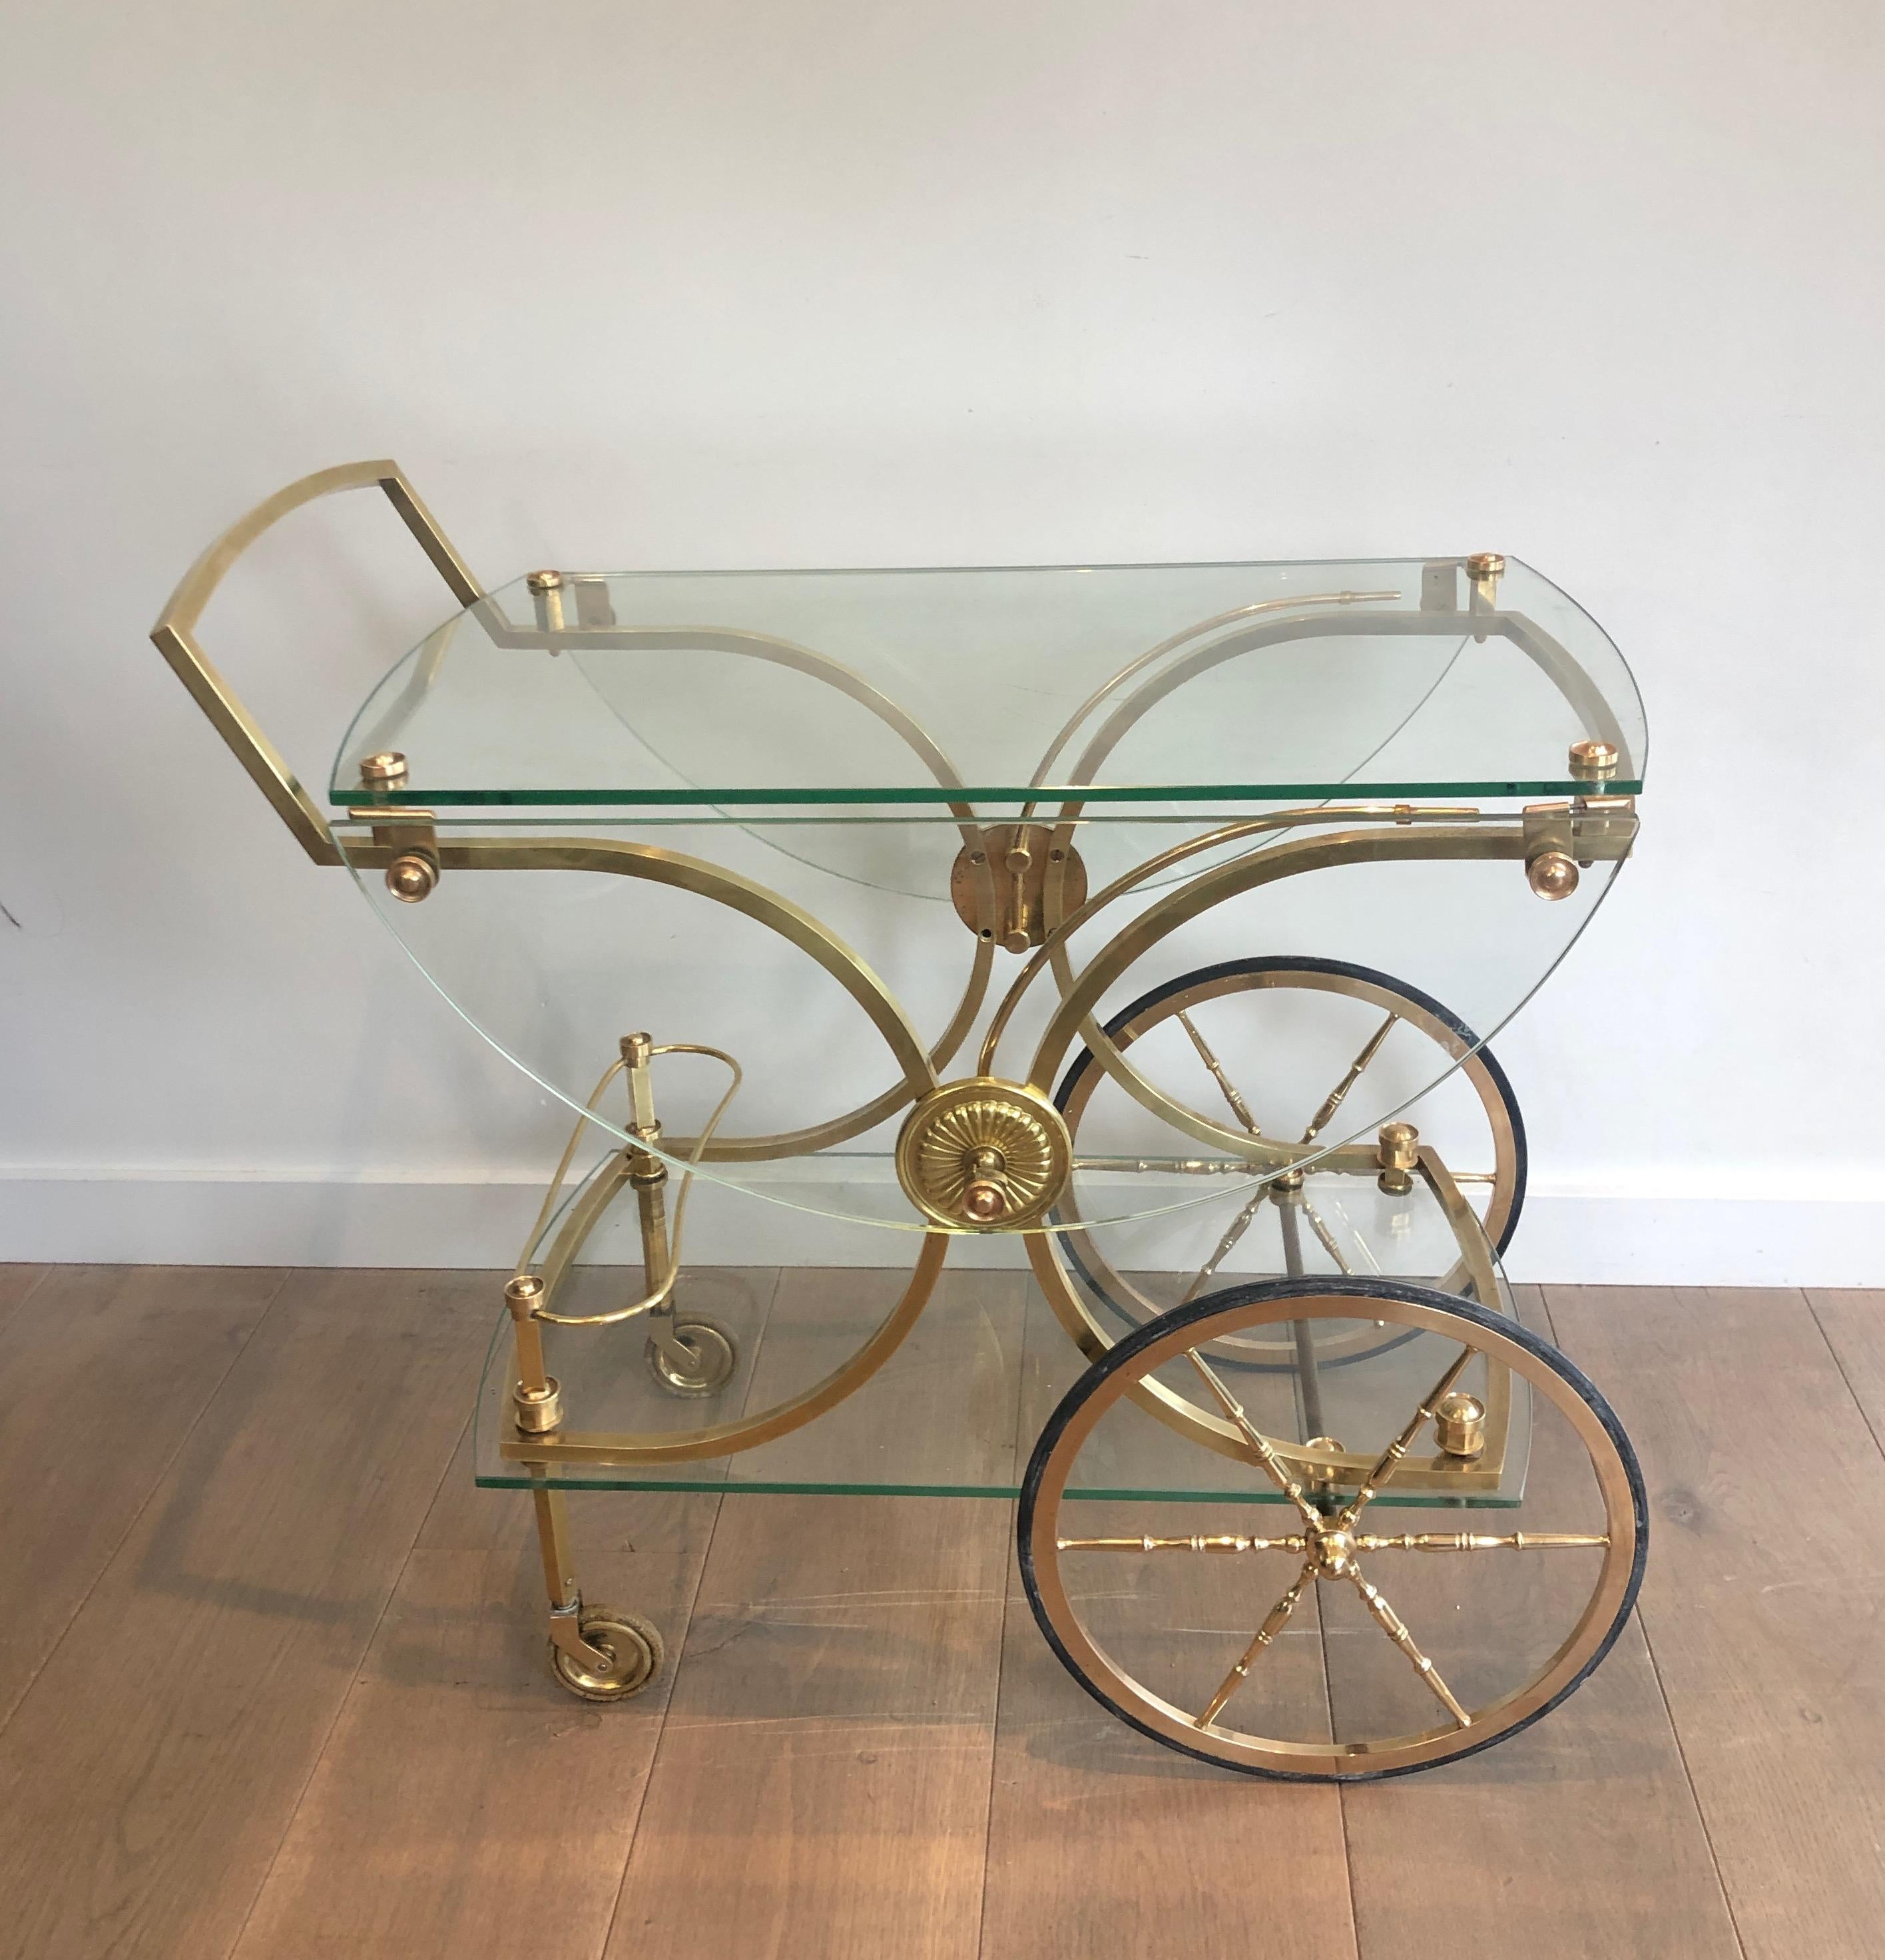 This rare neoclassical style bar cart is made of brass with glass shelves and removable rounded glass on the sides that can allow the drinks trolley to become a real round table. This is a work by famous French designer Maison Bagués, circa 1940.